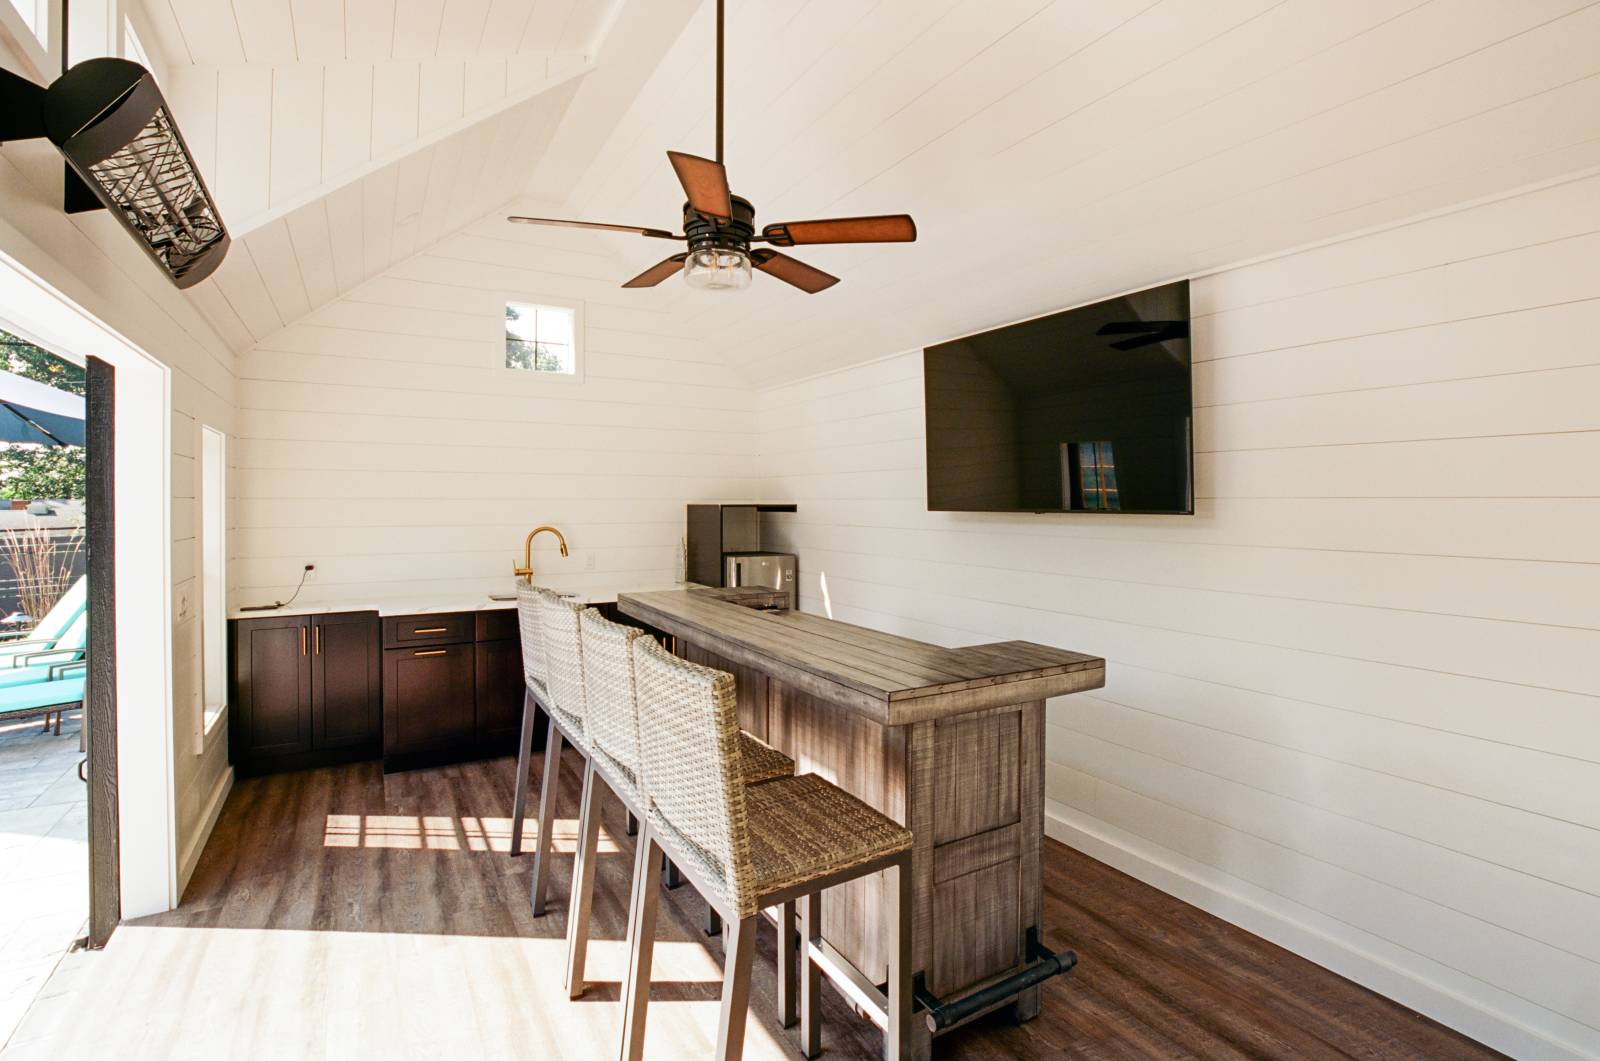 The Interior of the Carriage House Shed • Kitchenette and Bar